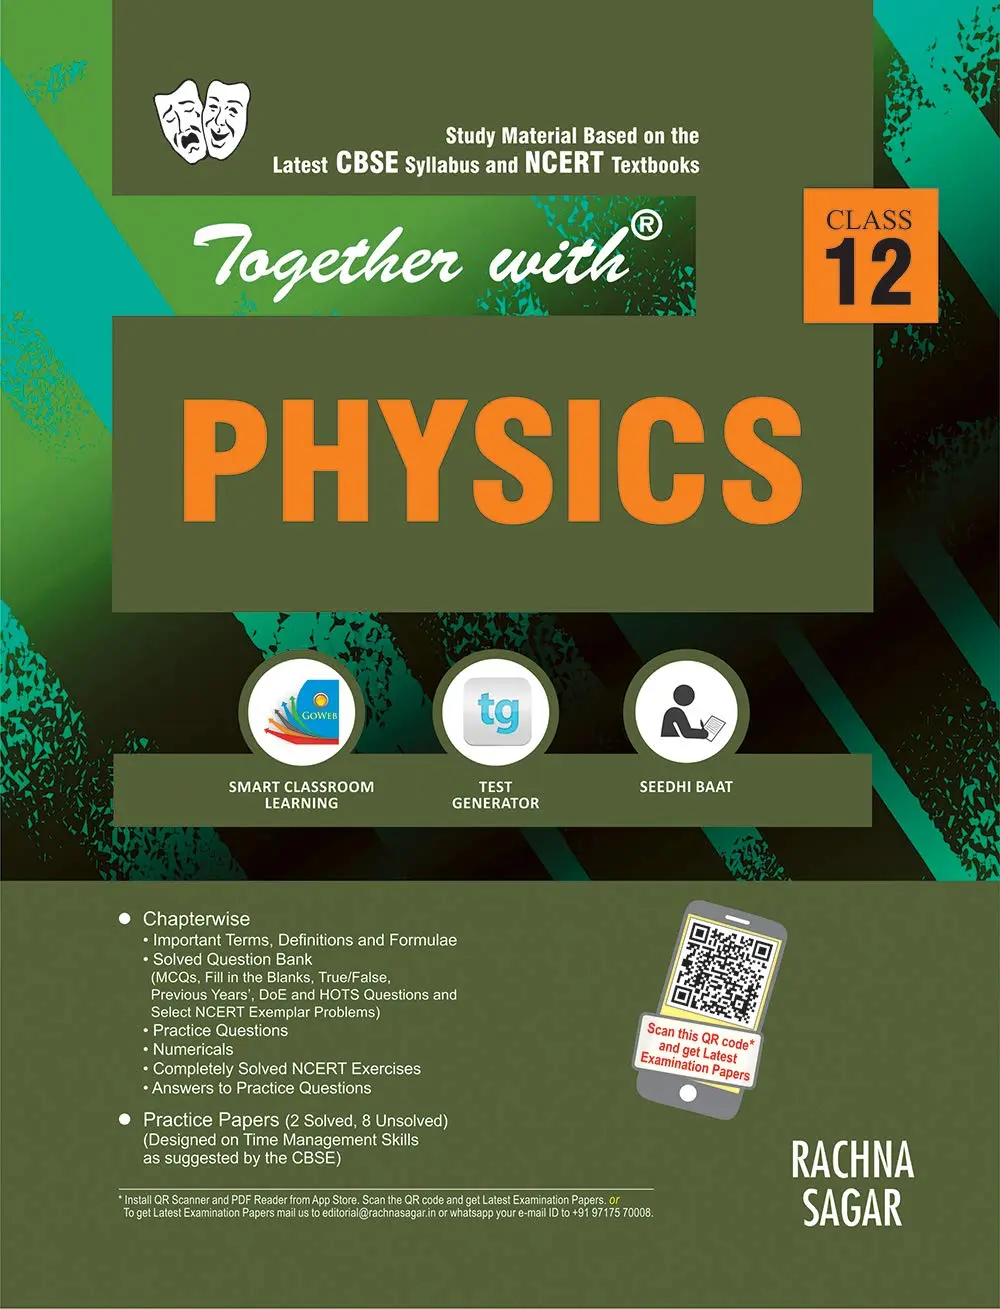 Together with physics